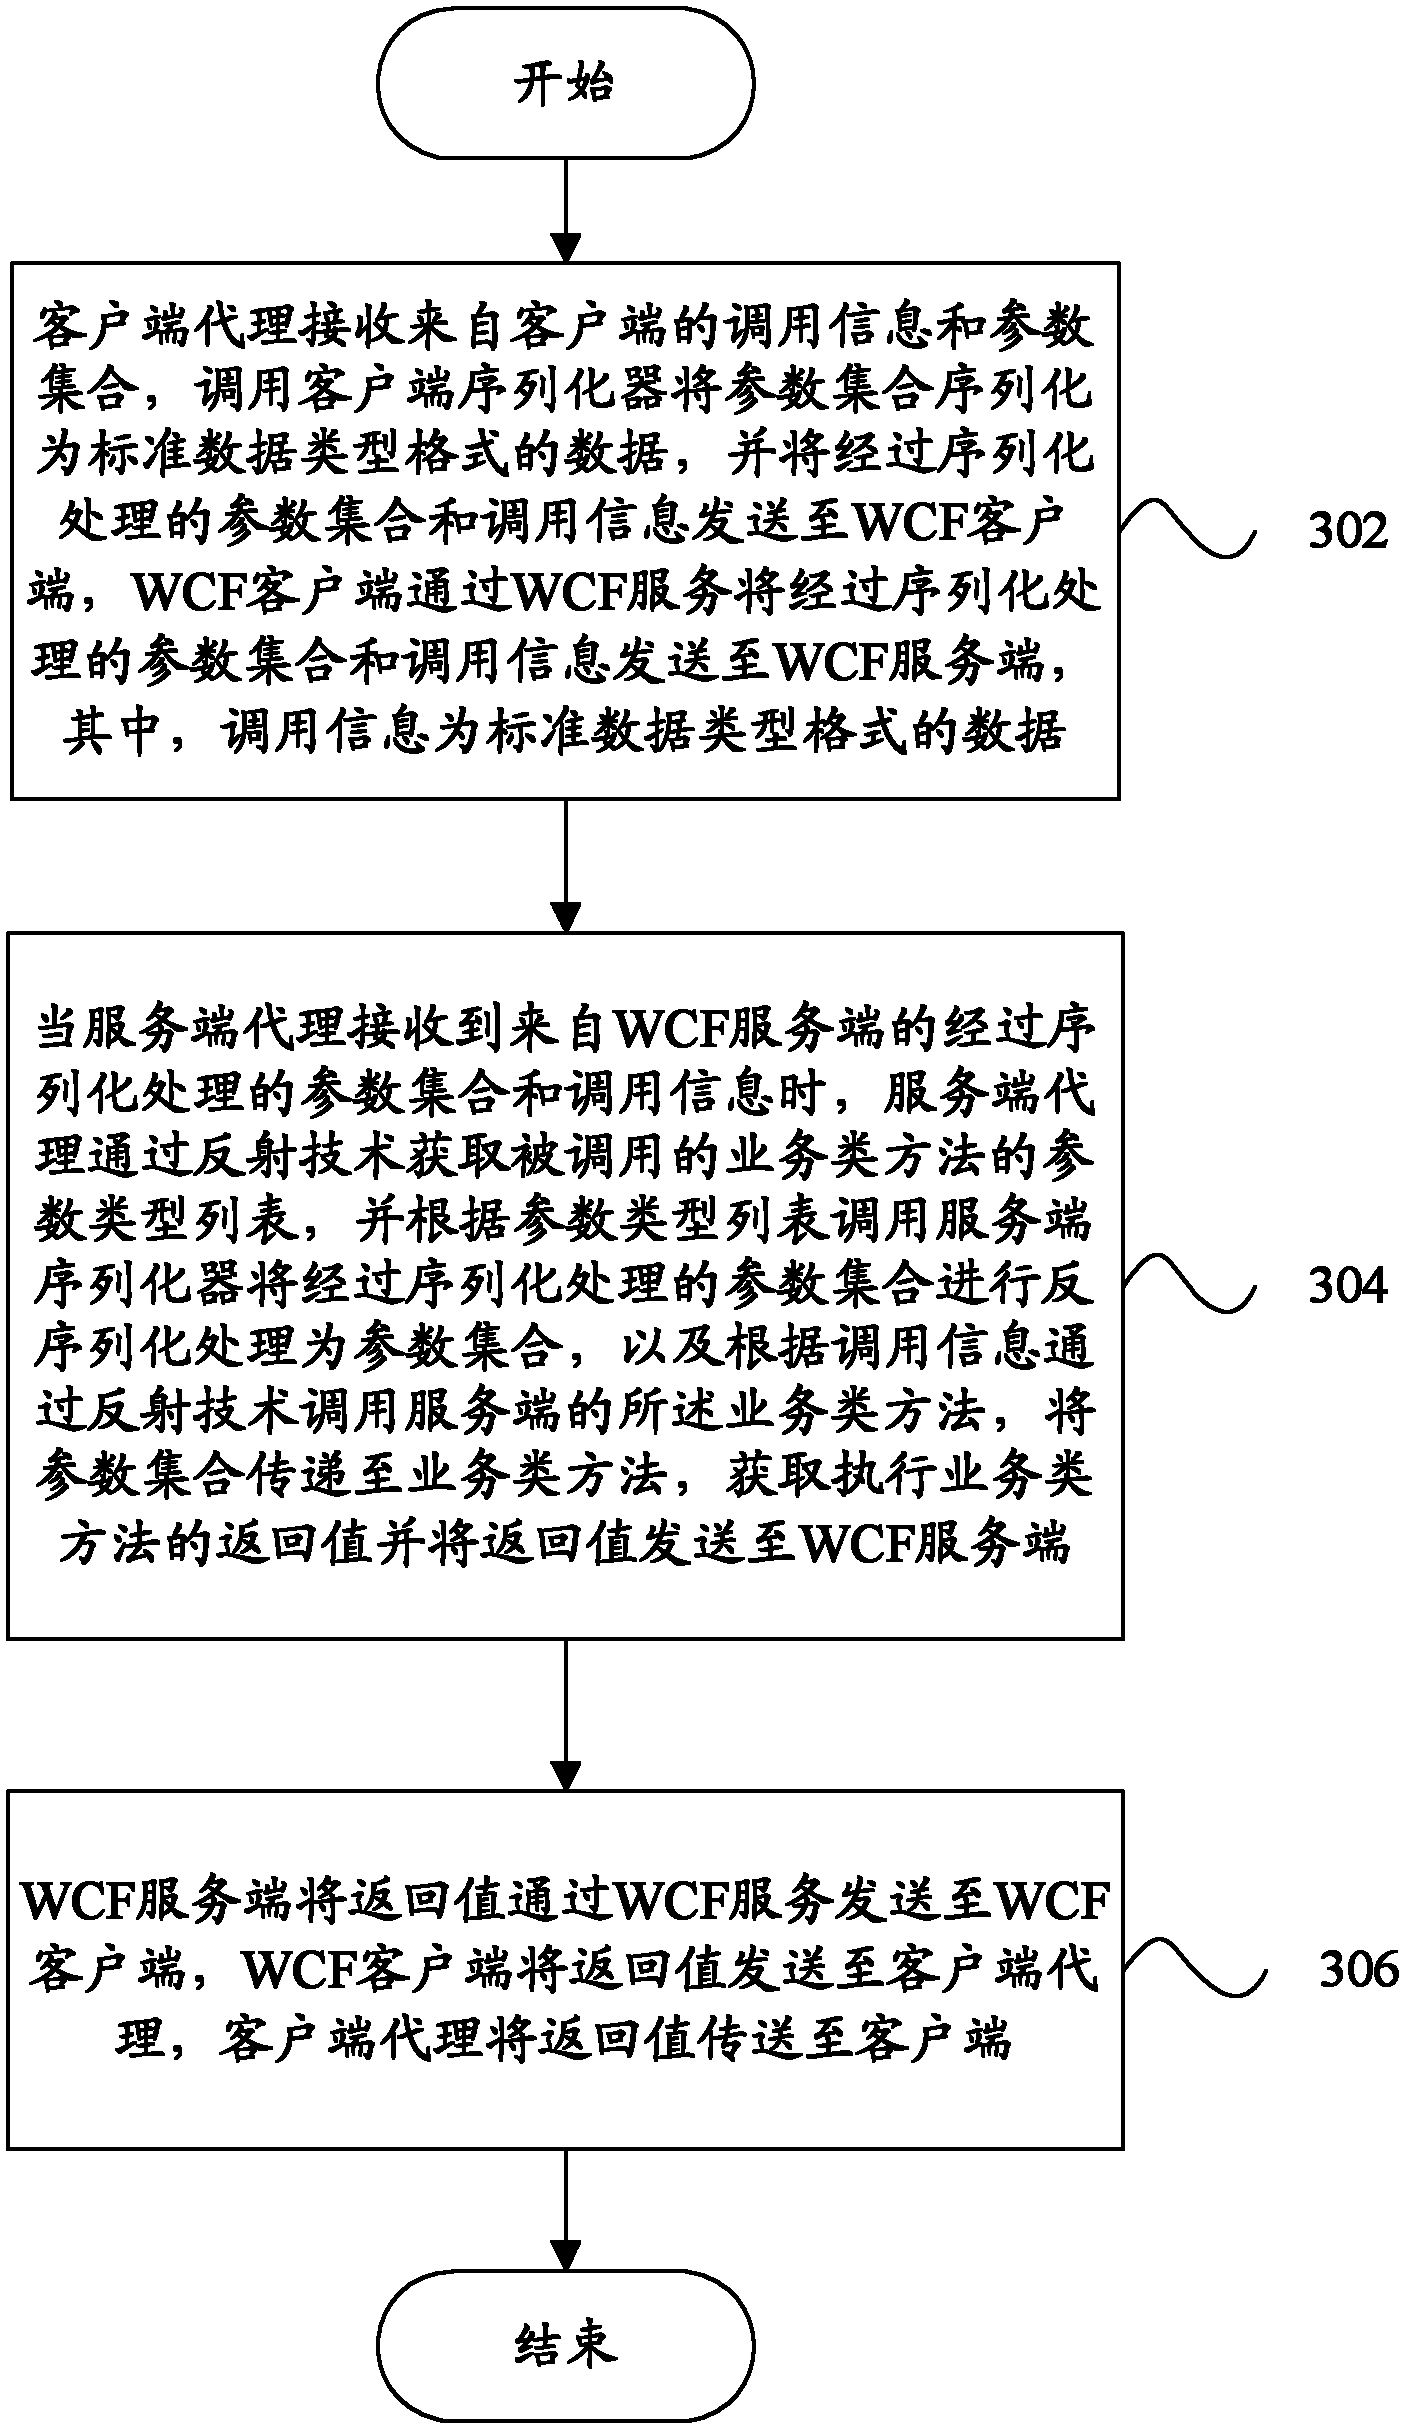 Method and system for interaction between server and client